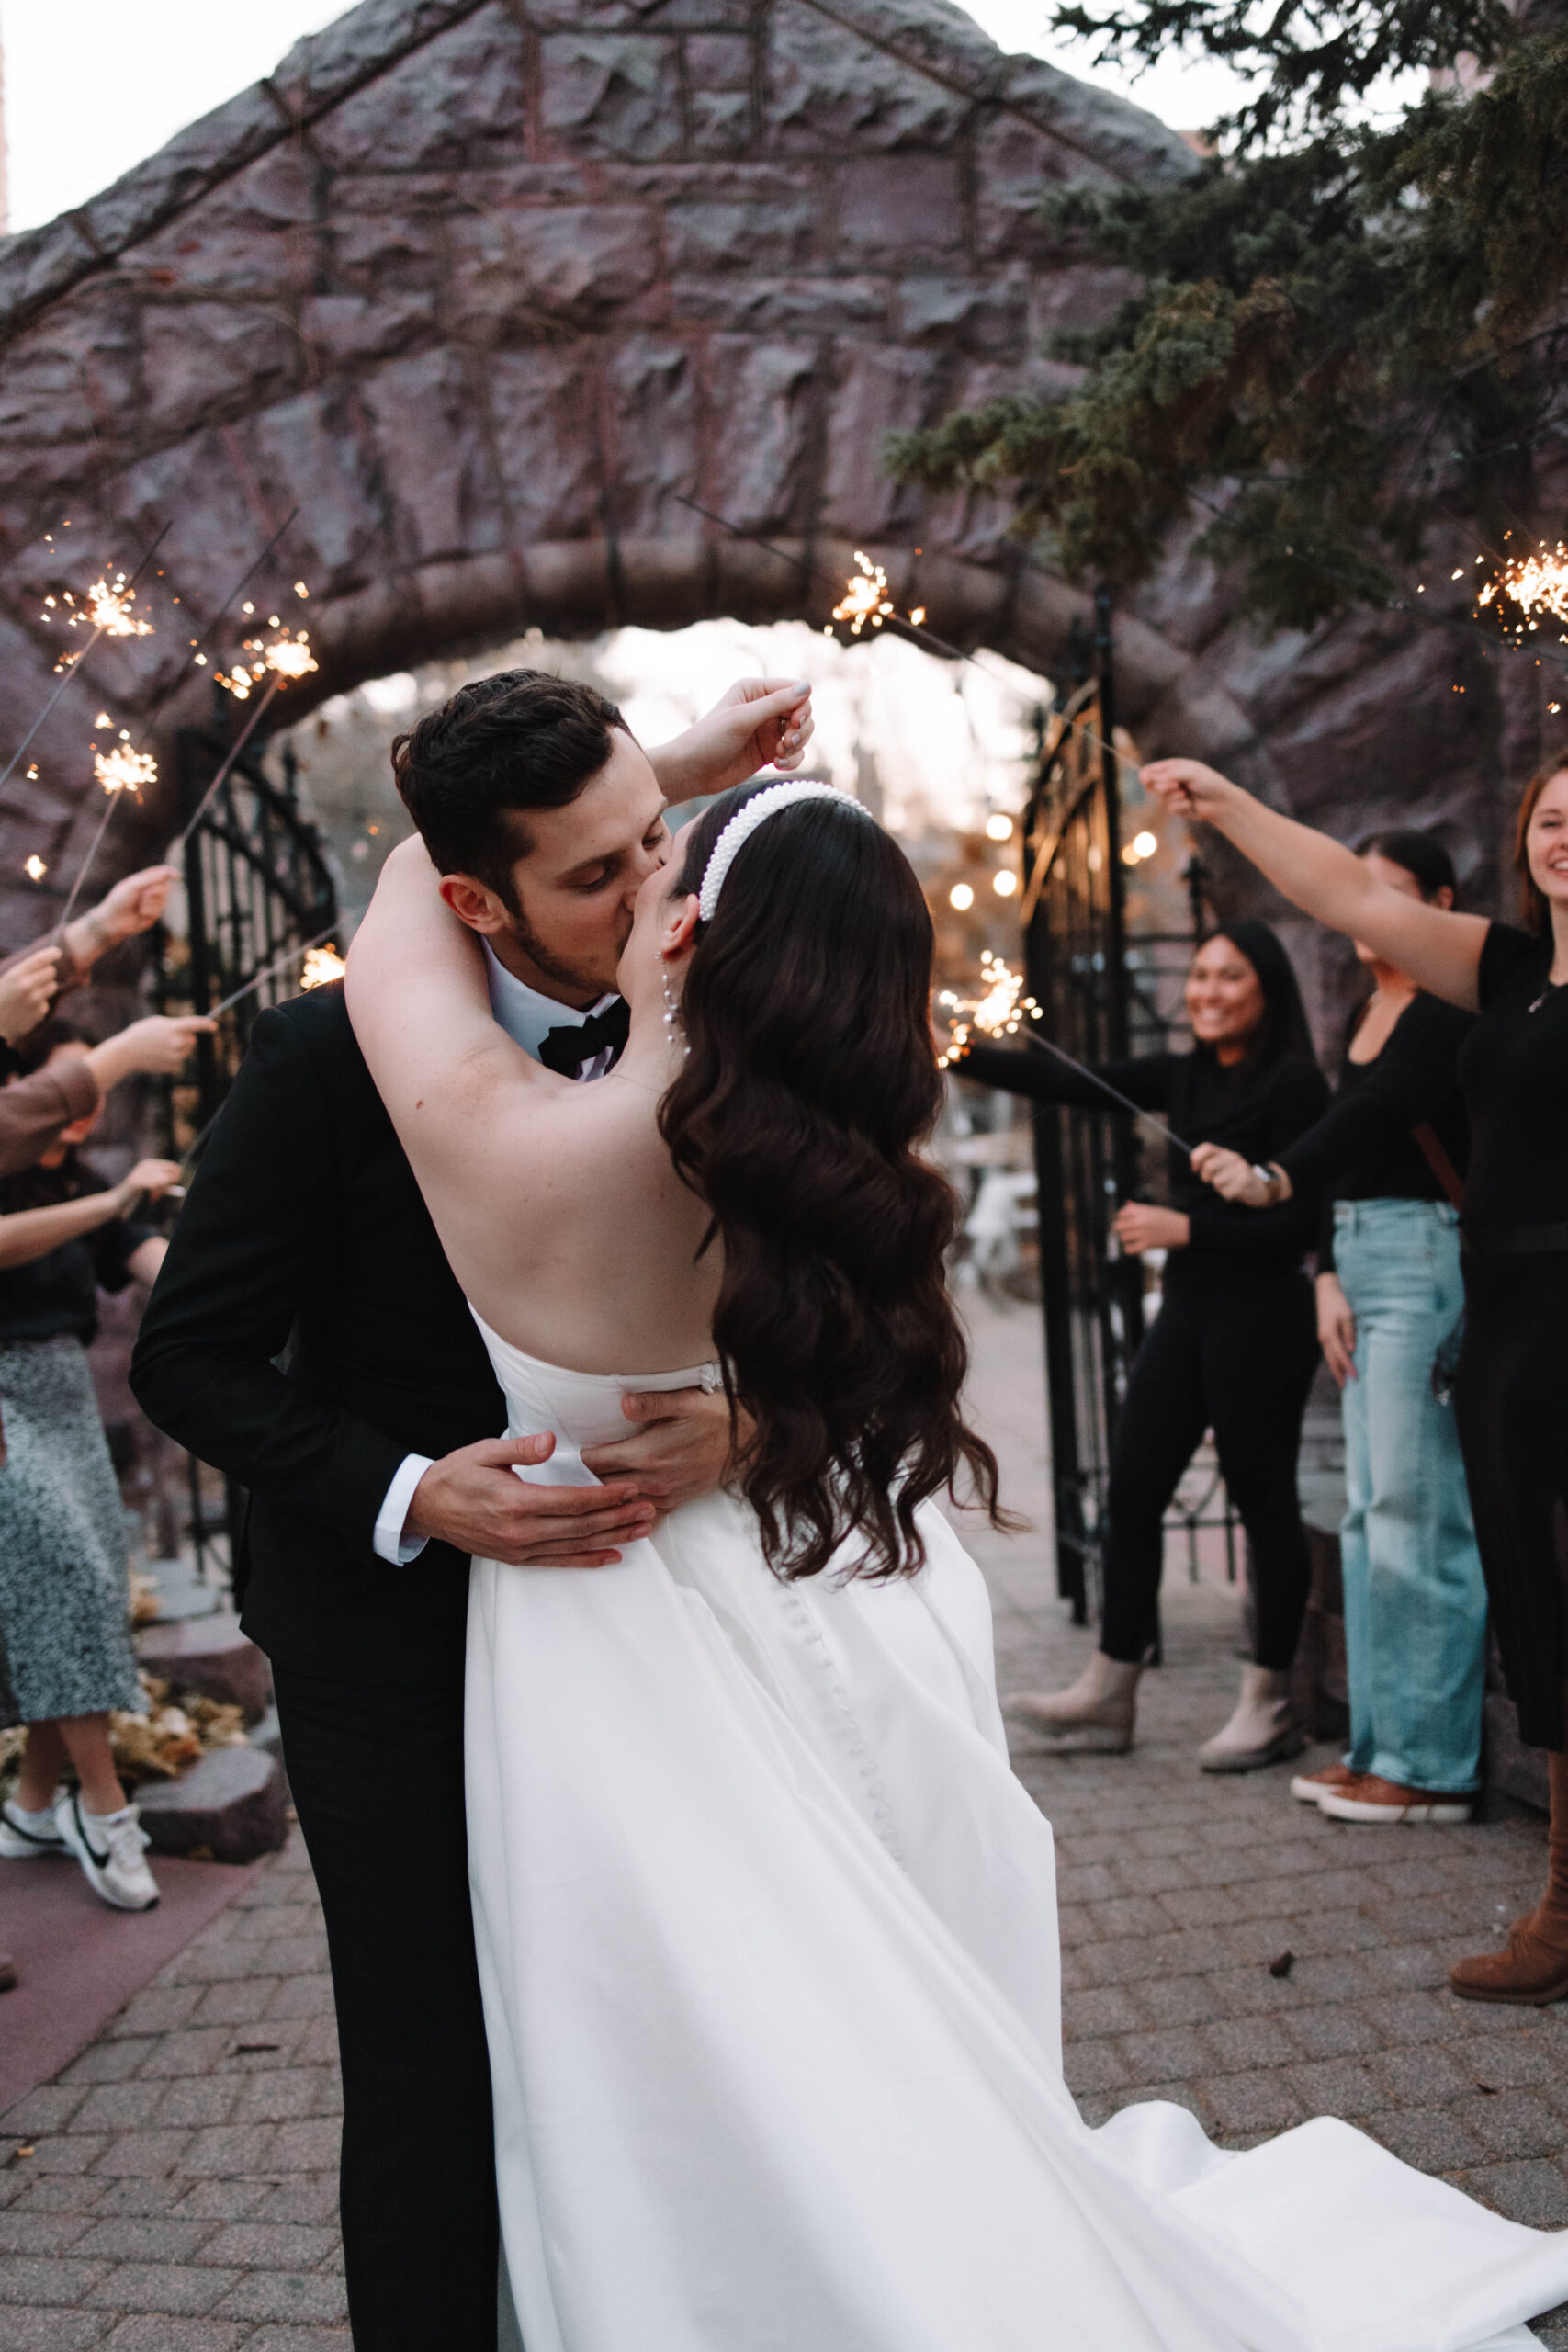 A bride and groom dip kissing below a stone archway. They are surrounded by smiling guests holding sparklers. The bride is in a white gown, and the groom is in a black tuxedo at the van dusen mansion